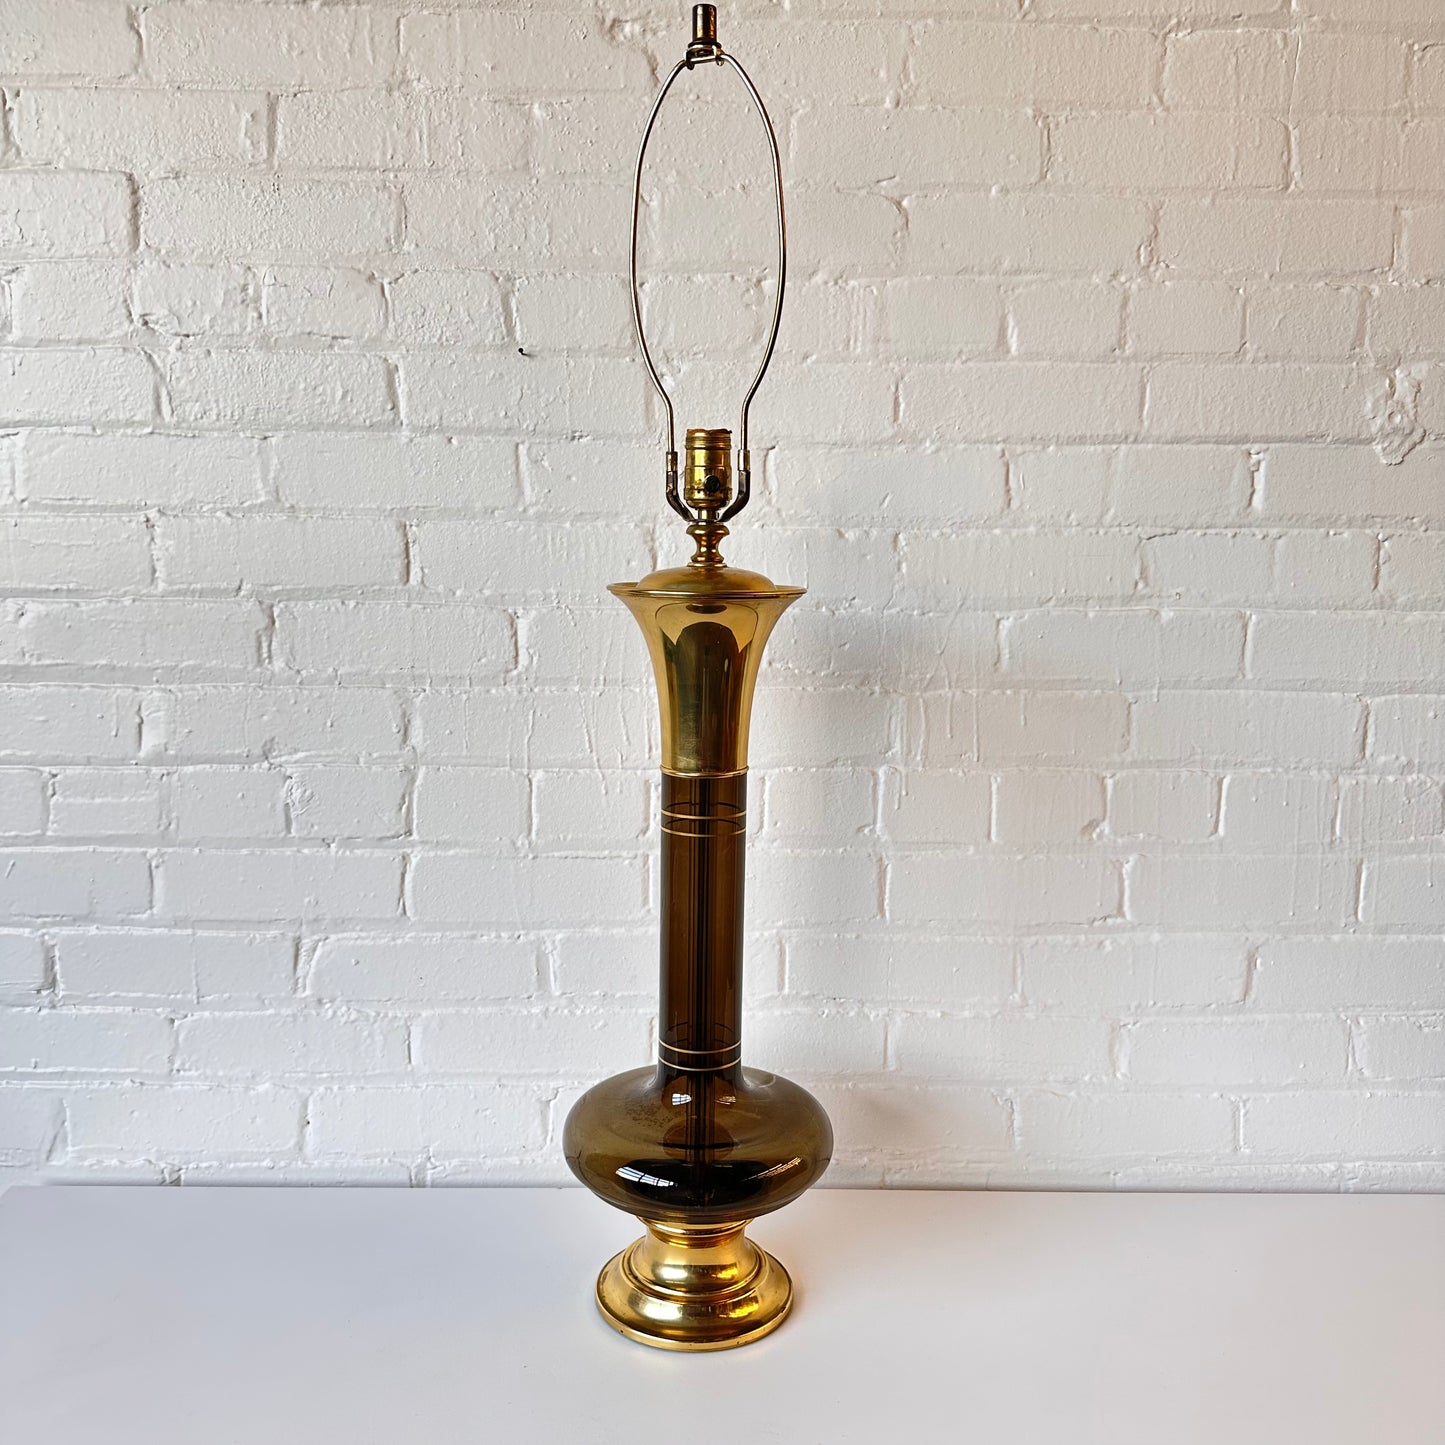 VINTAGE AMBER GLASS AND BRASS TABLE LAMP WITH SHADE